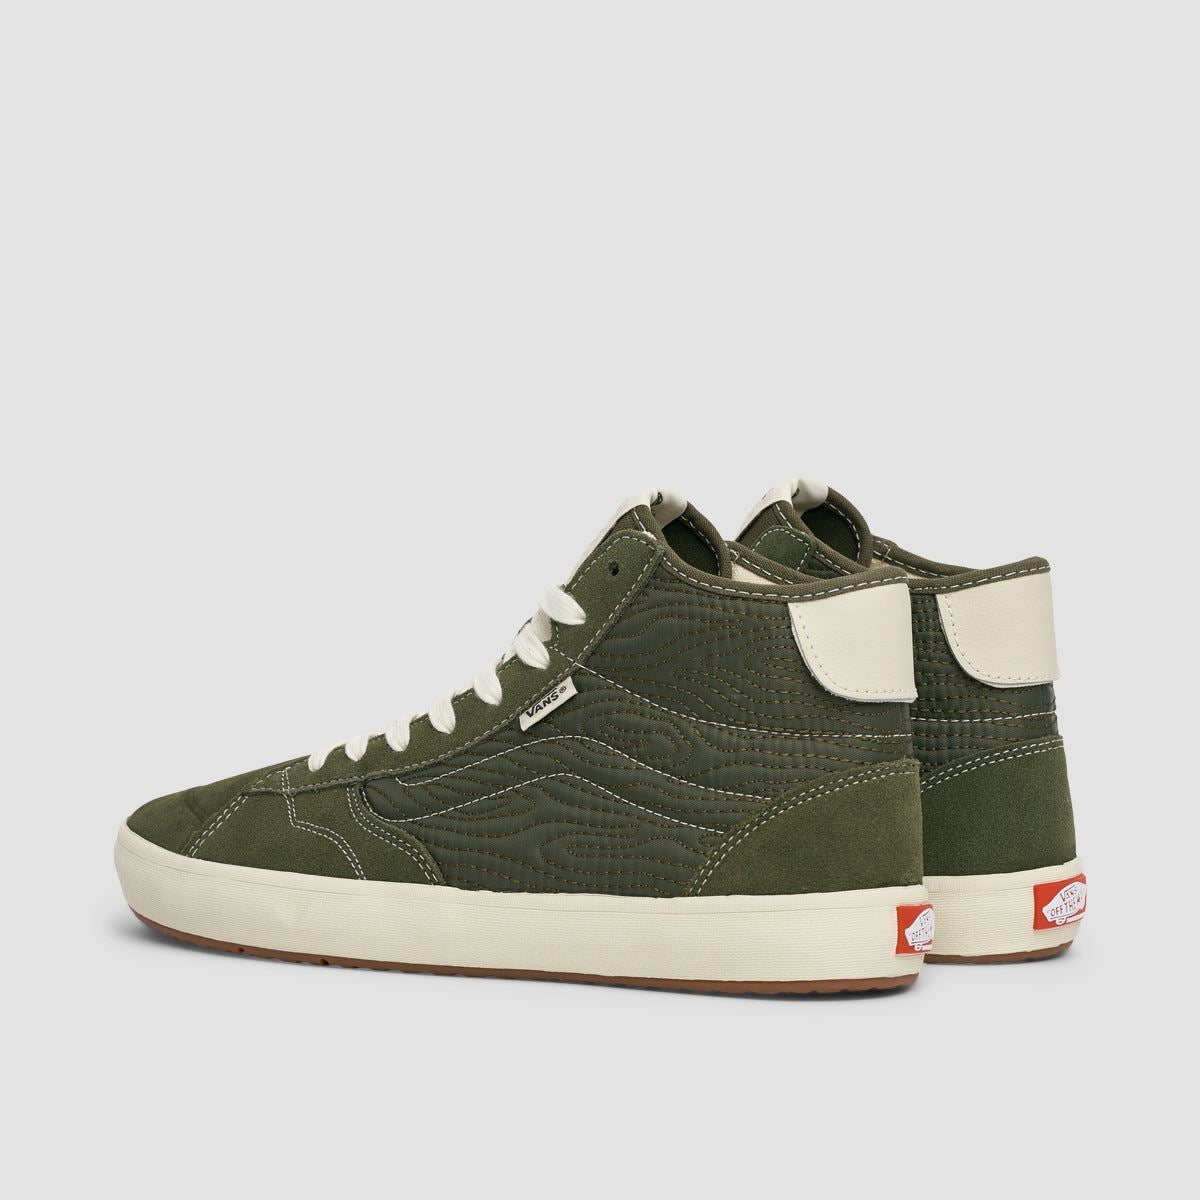 Vans The Lizzie High Top Shoes - Quilted Grape Leaf